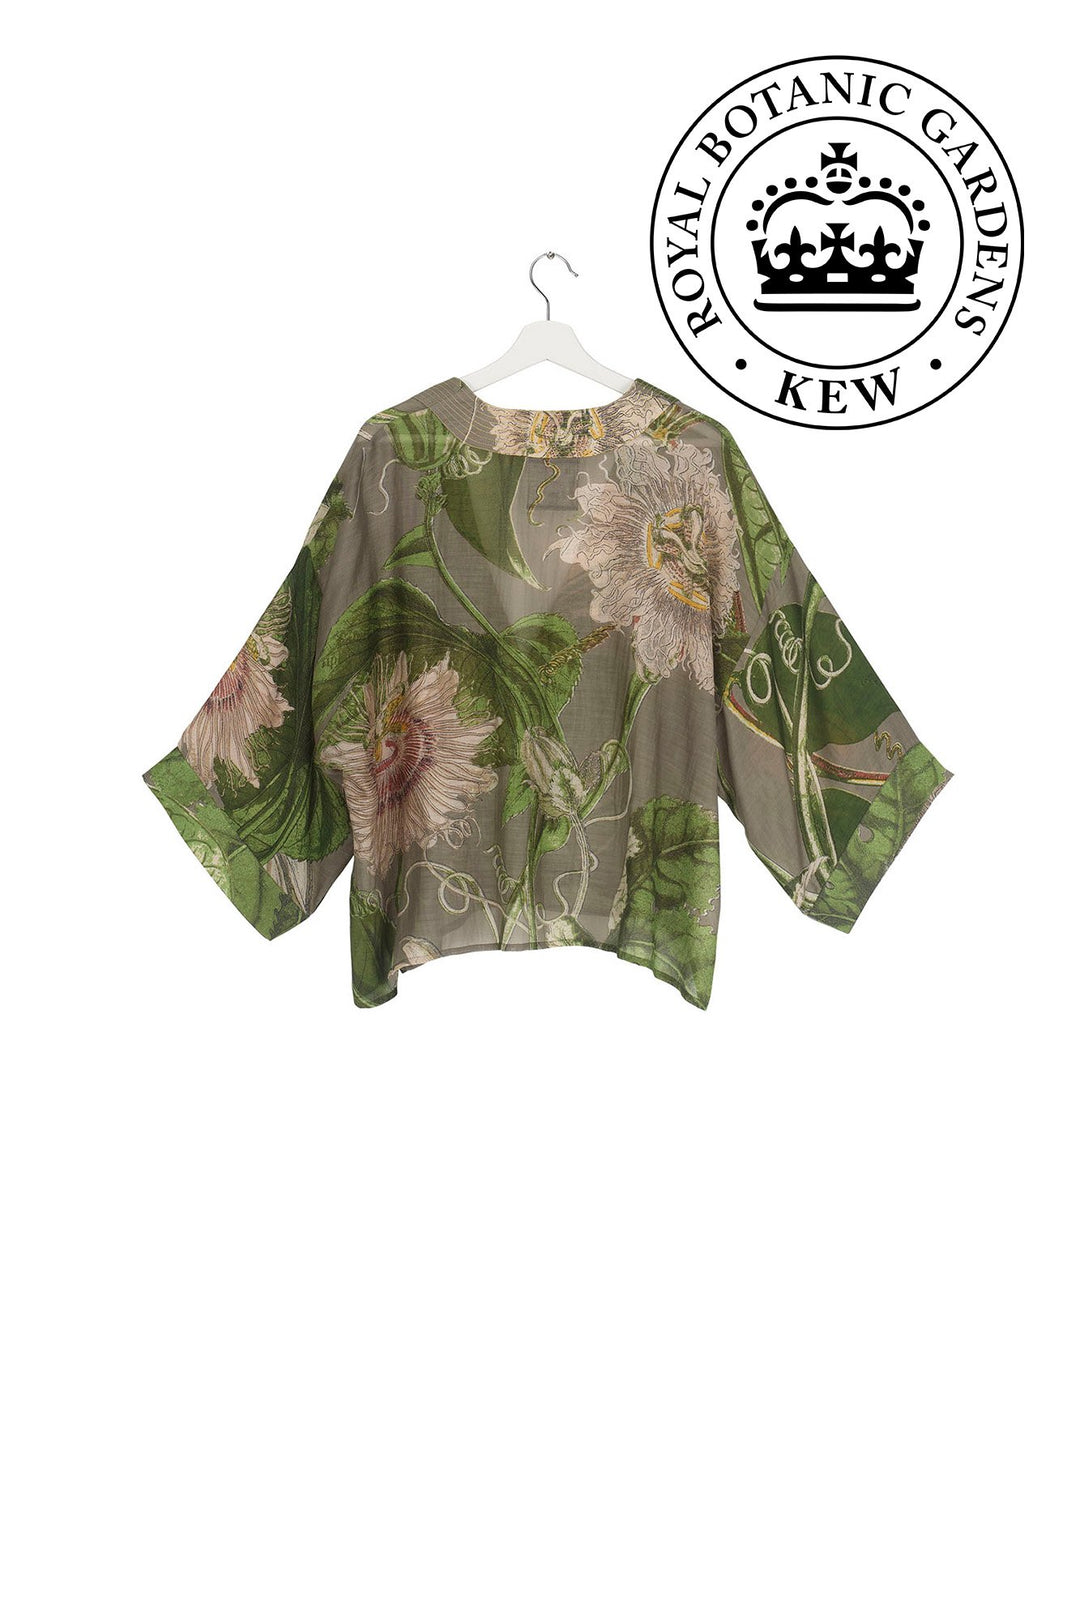 Passion Flower or 'Passiflora' mini kimono in stone by One Hundred Stars in Collaboration with Kew, Royal Botanic Gardens. 